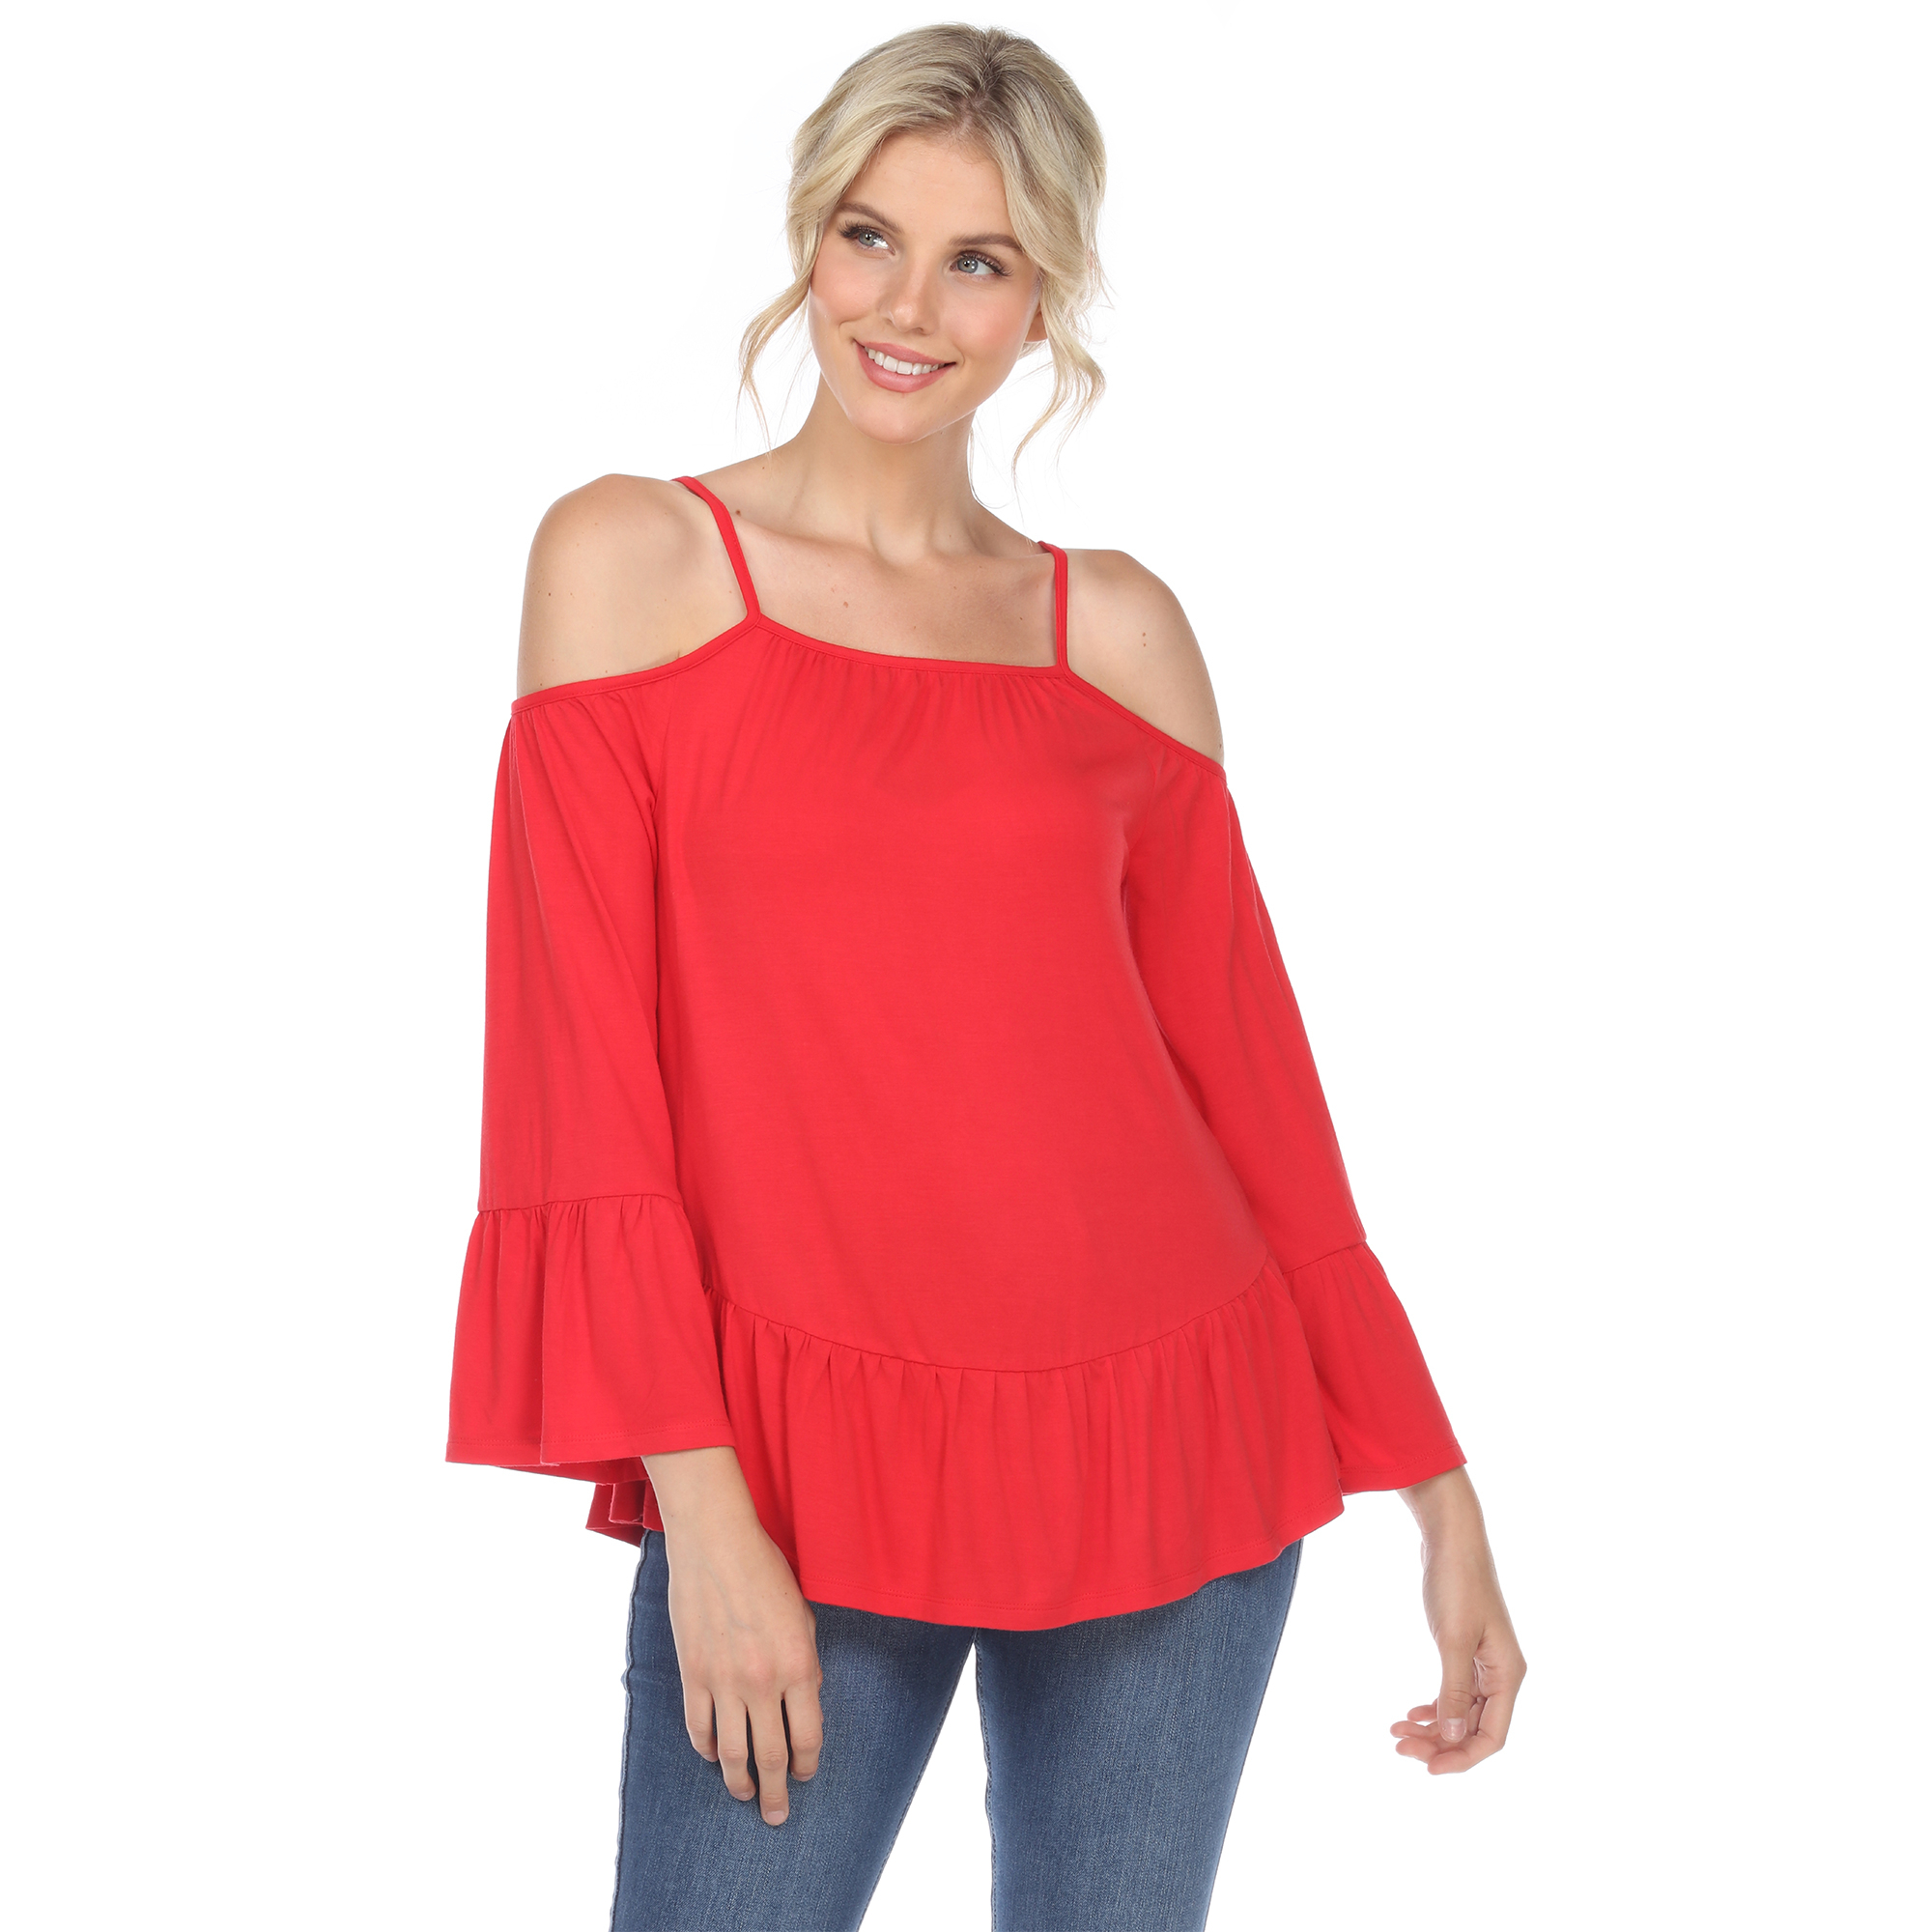 White Mark Women's Cold Shoulder Ruffle Sleeve Top - Red, 3X